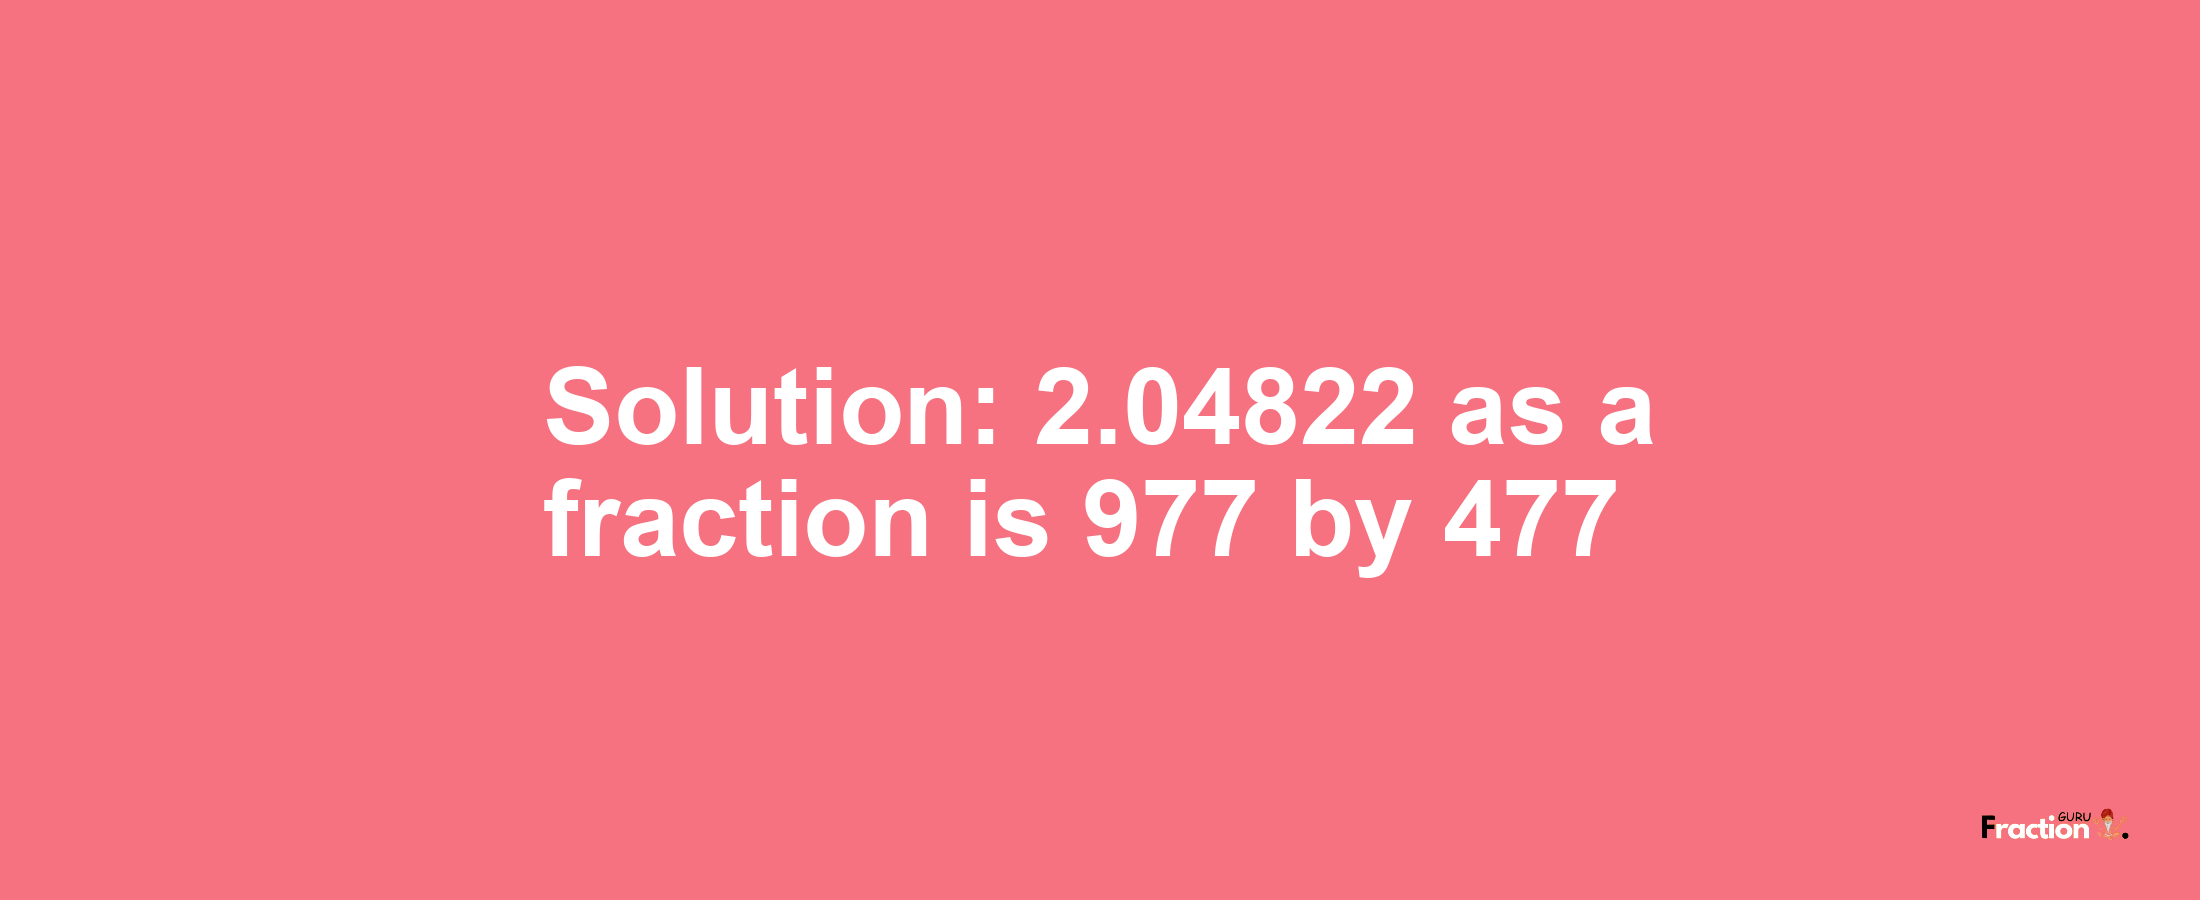 Solution:2.04822 as a fraction is 977/477